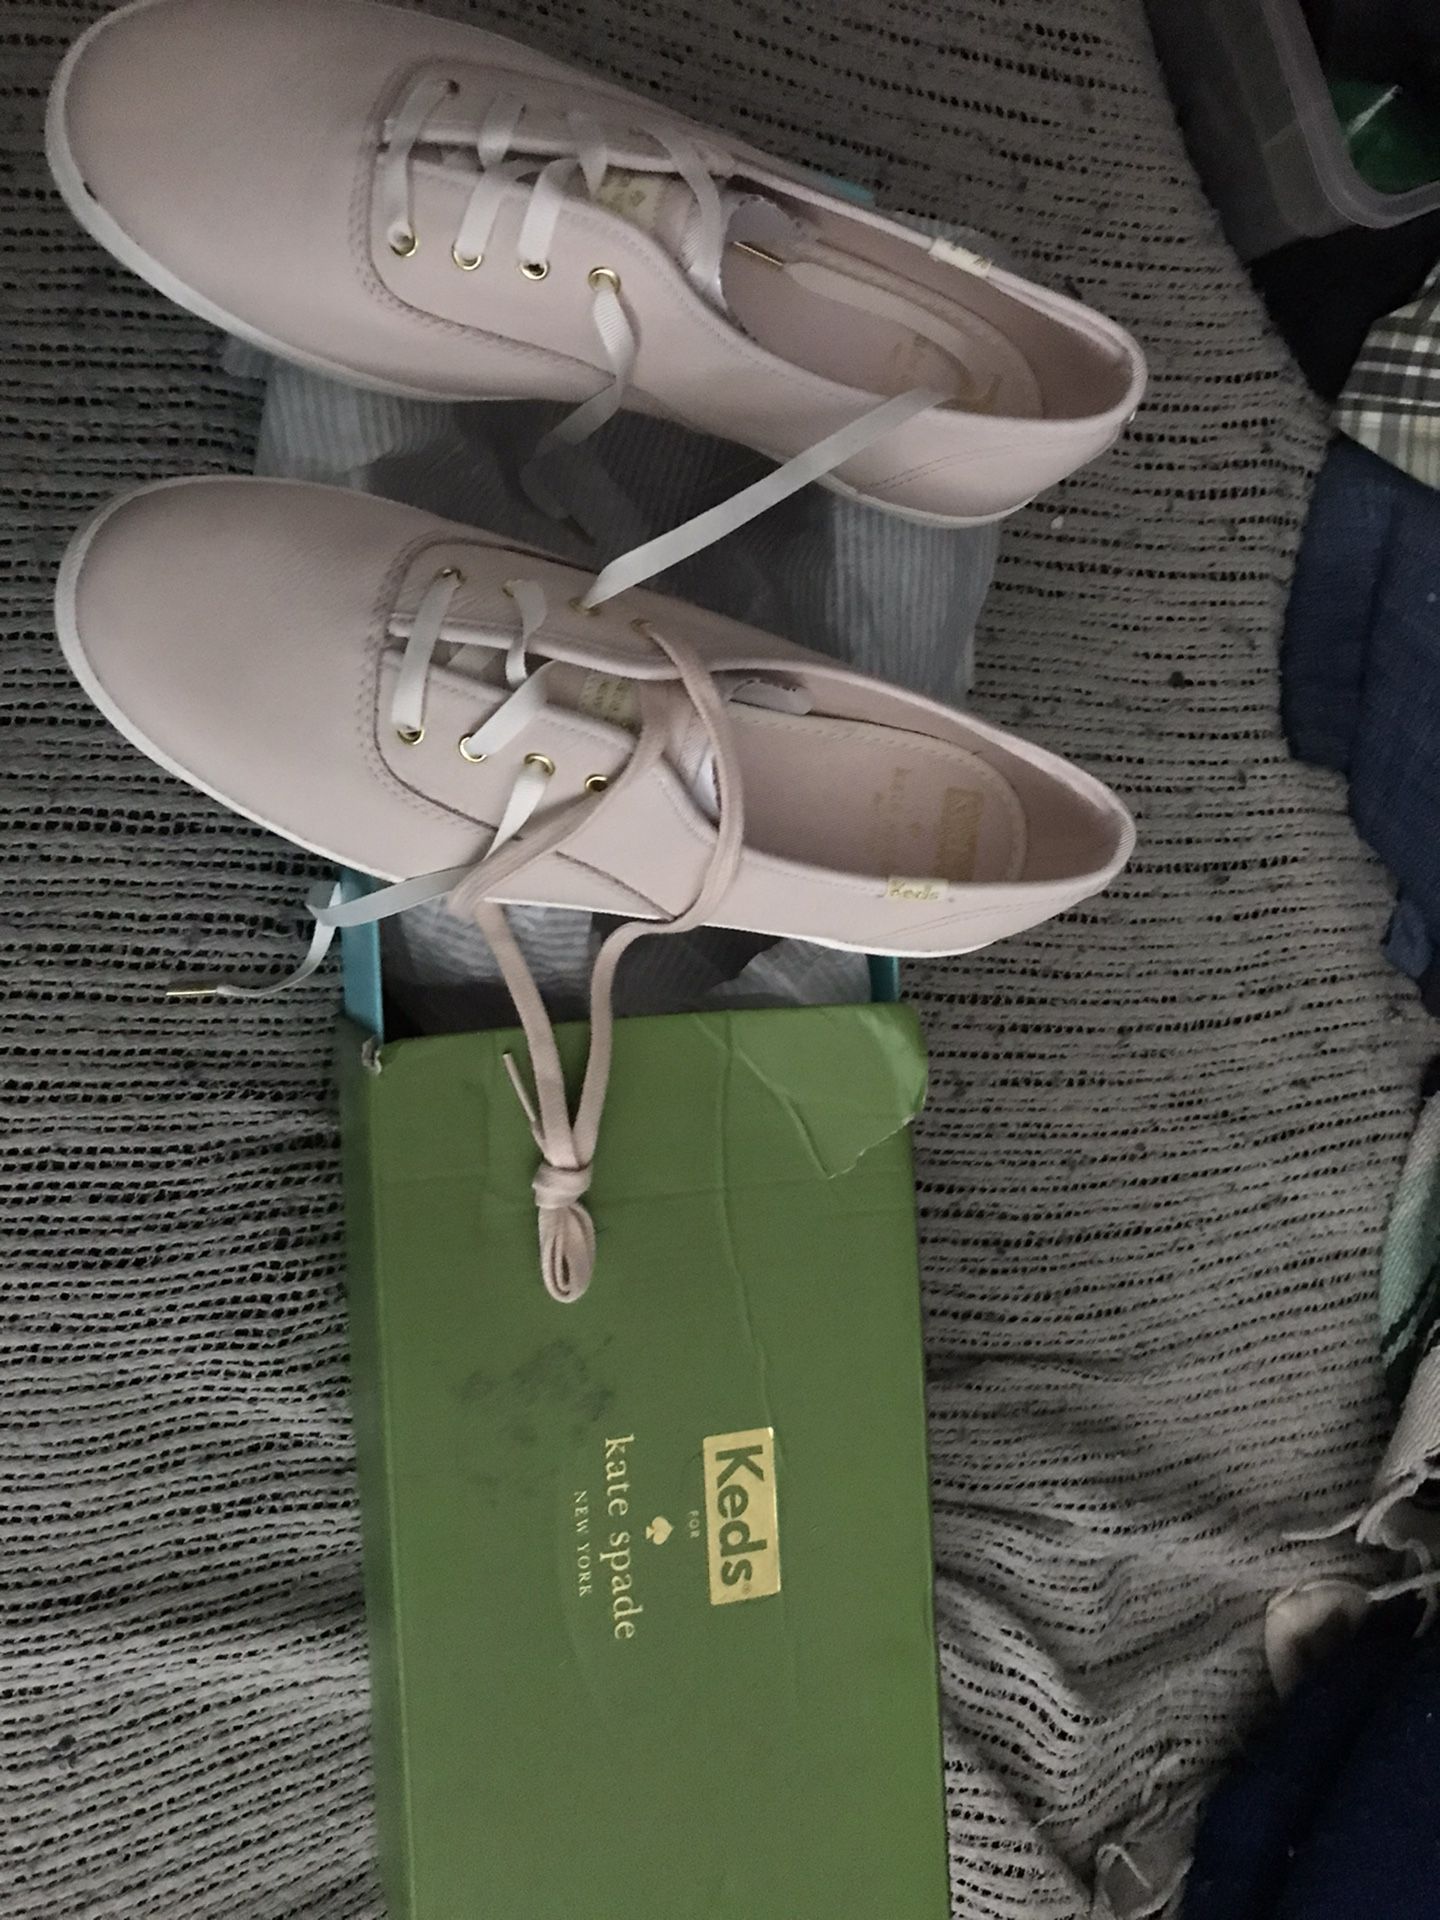 Brand new leather Kate spade New York tennis shoes price to sell quick only $75